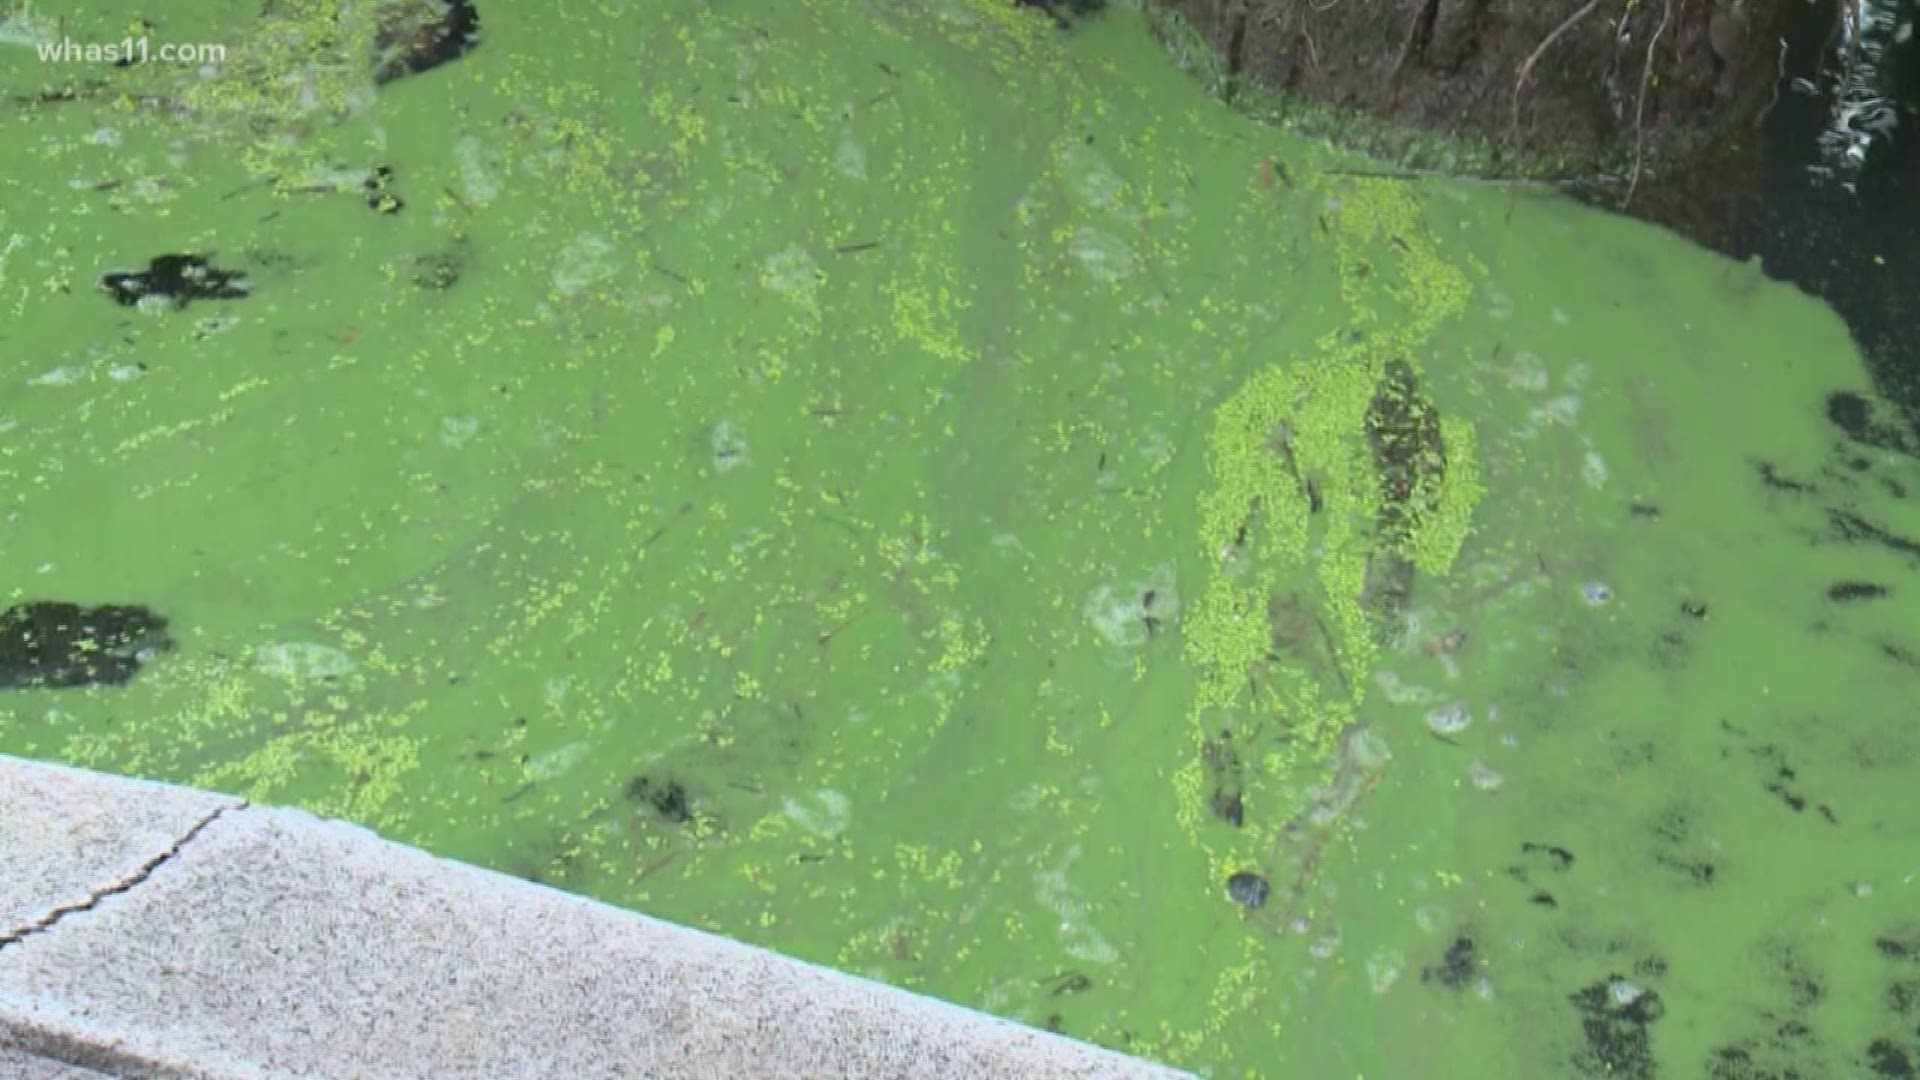 The Kentucky Division of Water and the Kentucky Department of Public Health issued a recreational public health advisory concerning the elevated harmful algal bloom